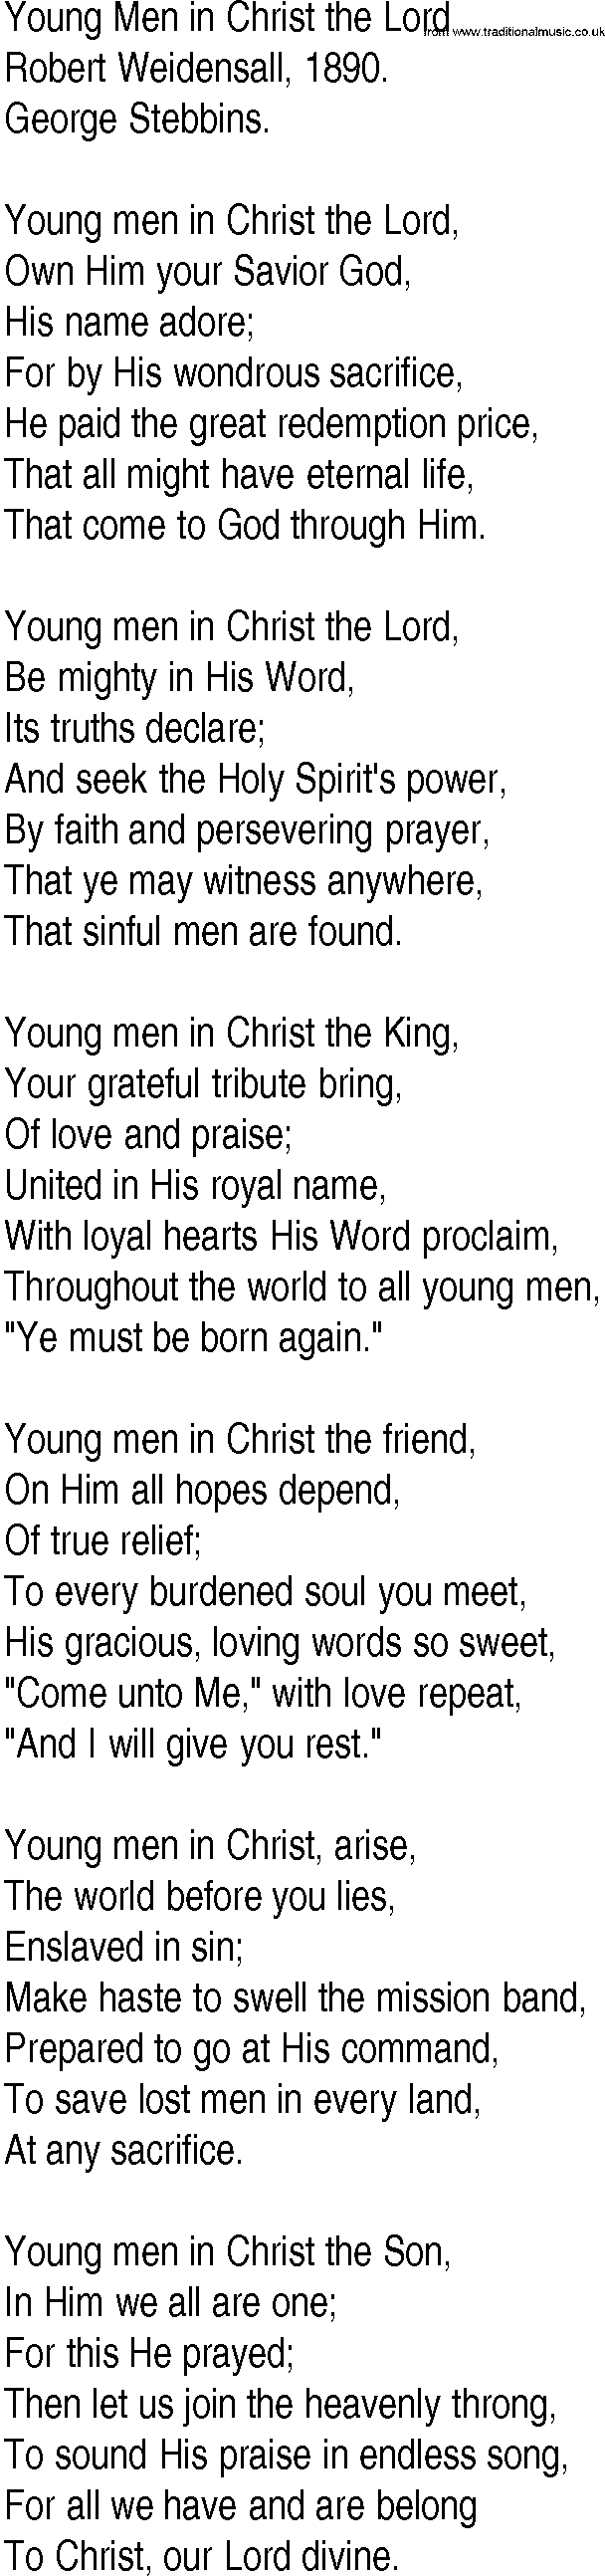 Hymn and Gospel Song: Young Men in Christ the Lord by Robert Weidensall lyrics